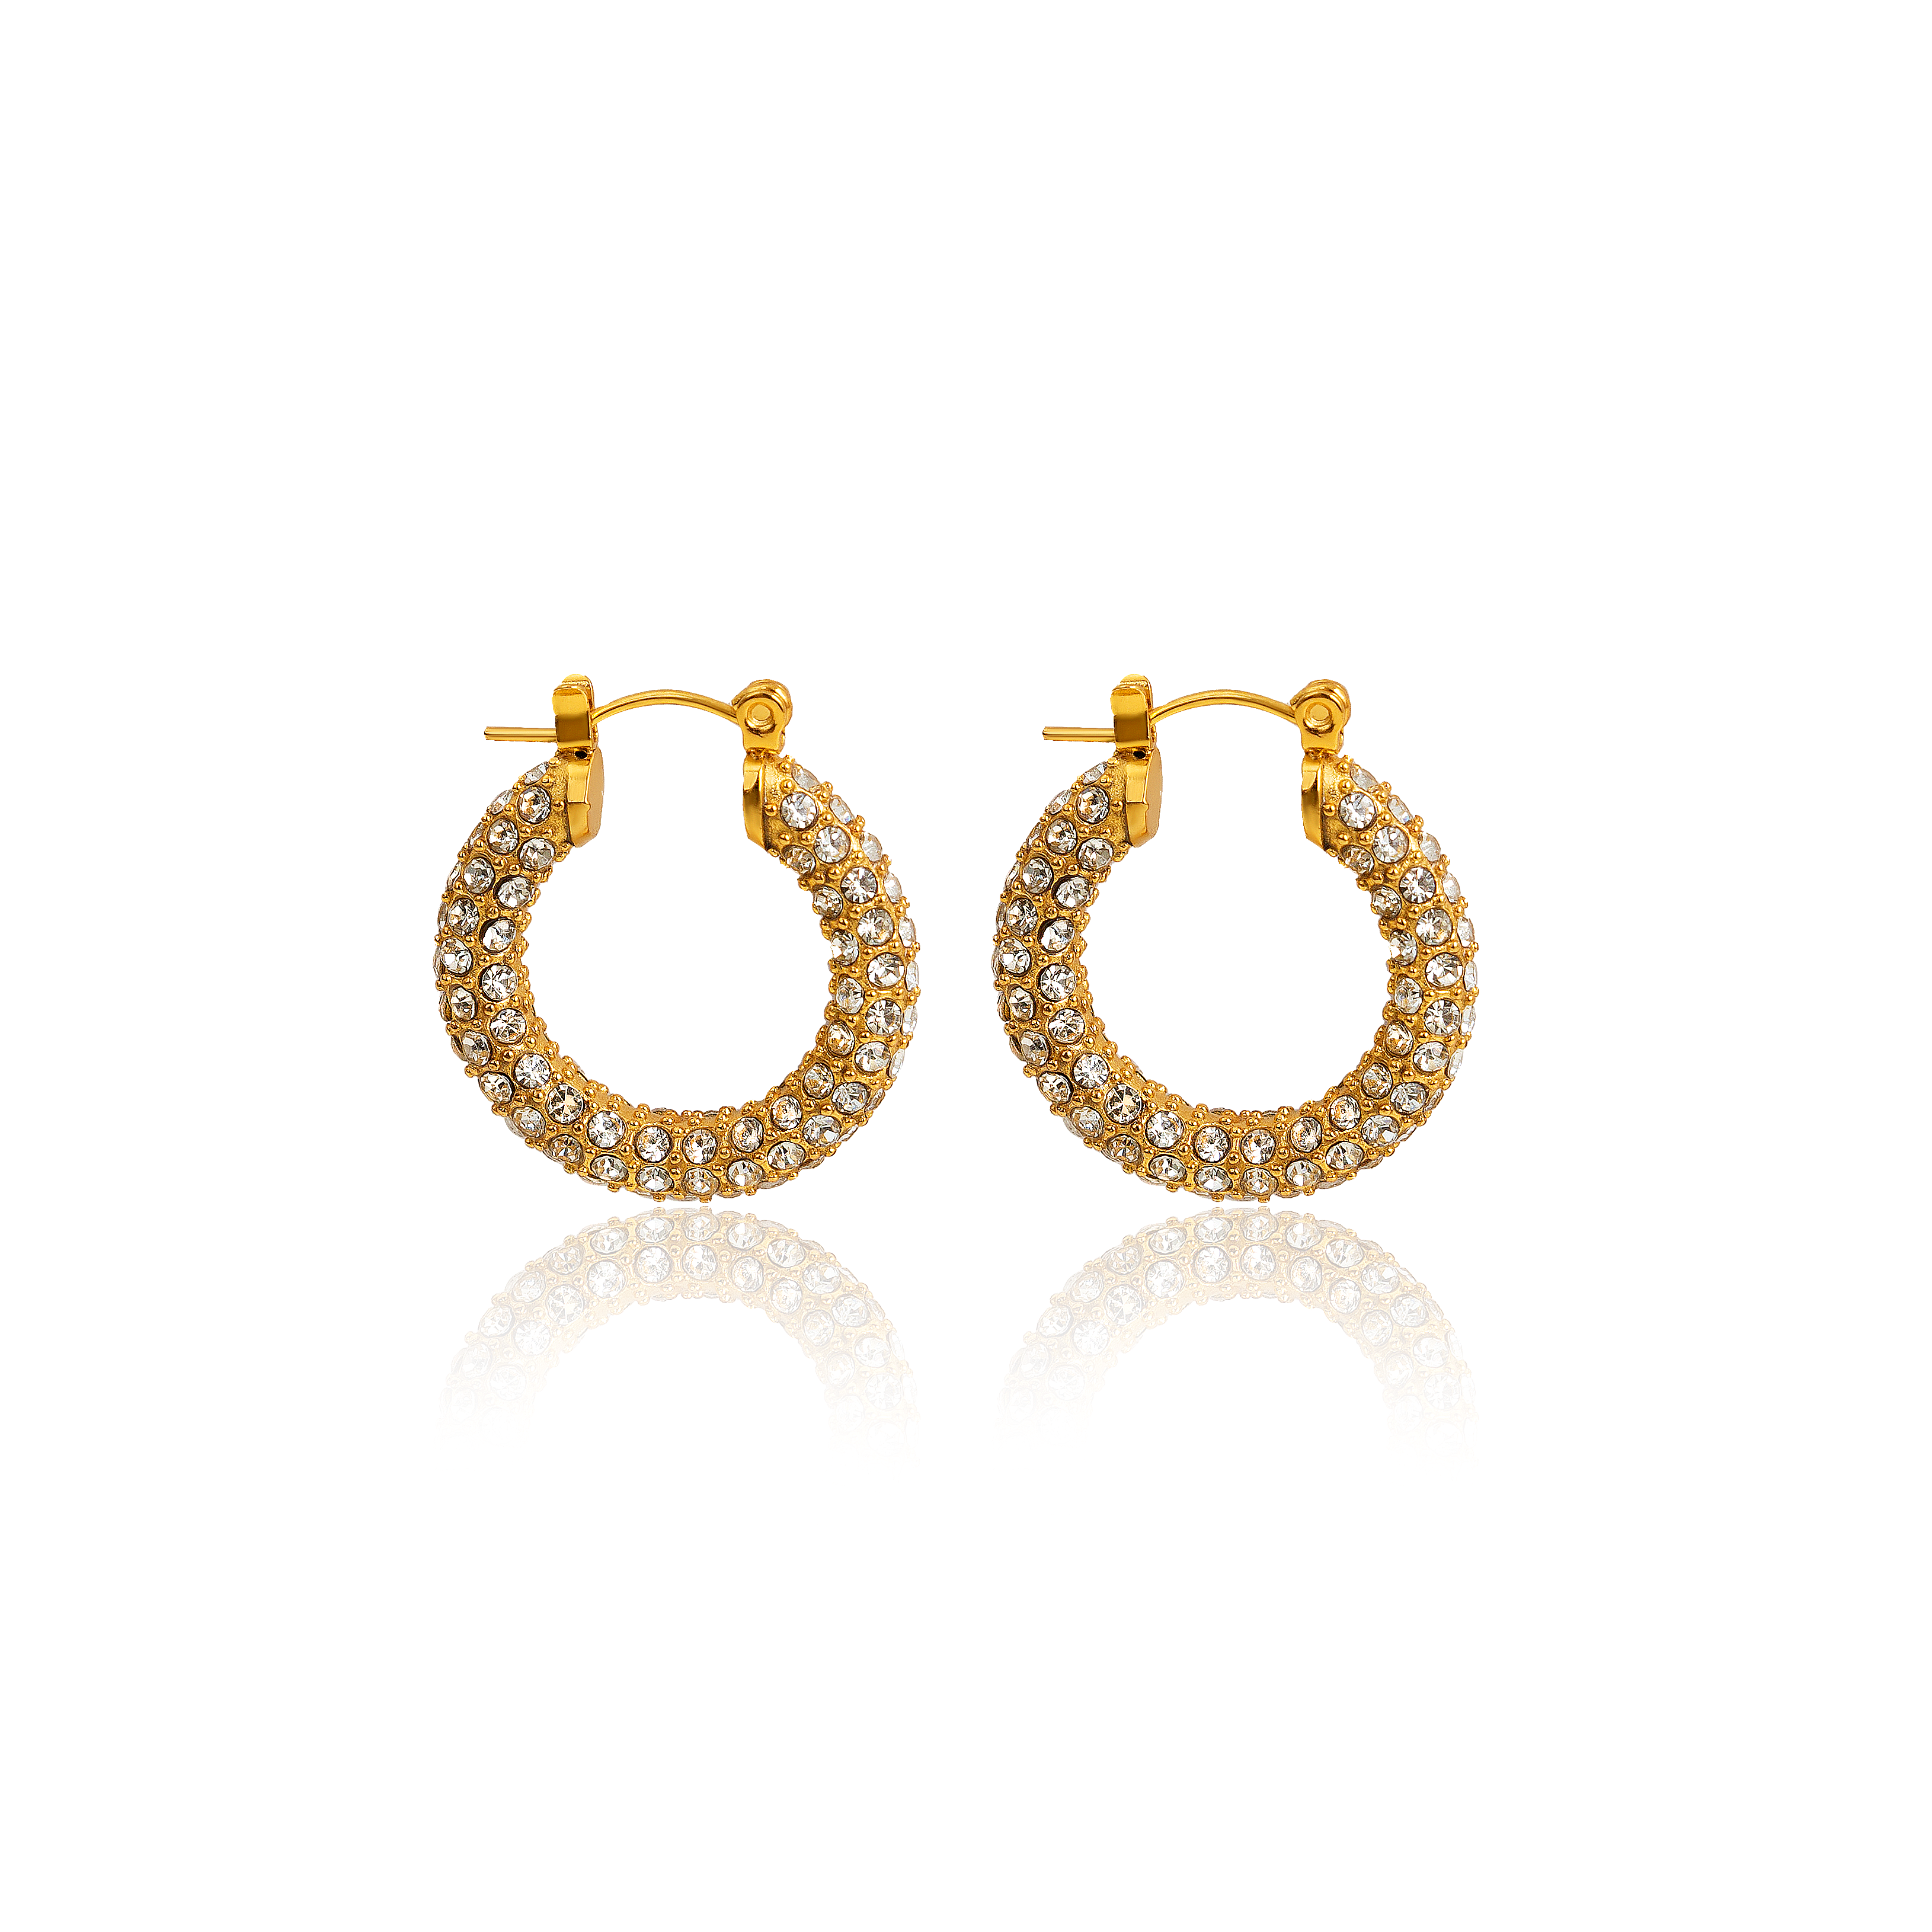 These hoop earrings will add sparkle to your look with the inspirational, meaningful message on a chic, timeless style.  18k gold plated on stainless steel Hoop size :23* 25mm